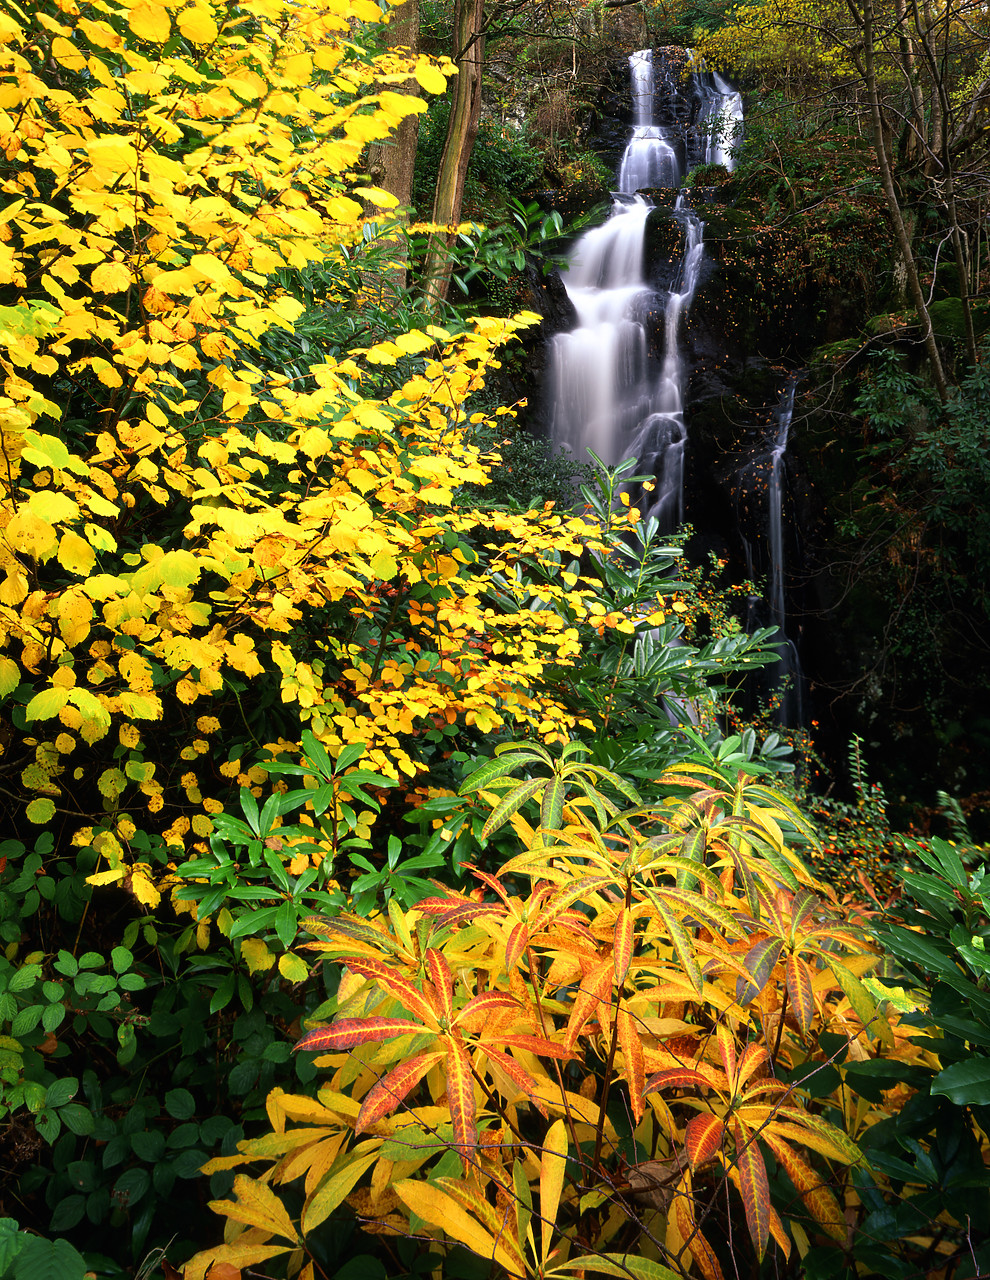 #030383-5 - Waterfall in Autumn, Lake District National Park, Cumbria, England